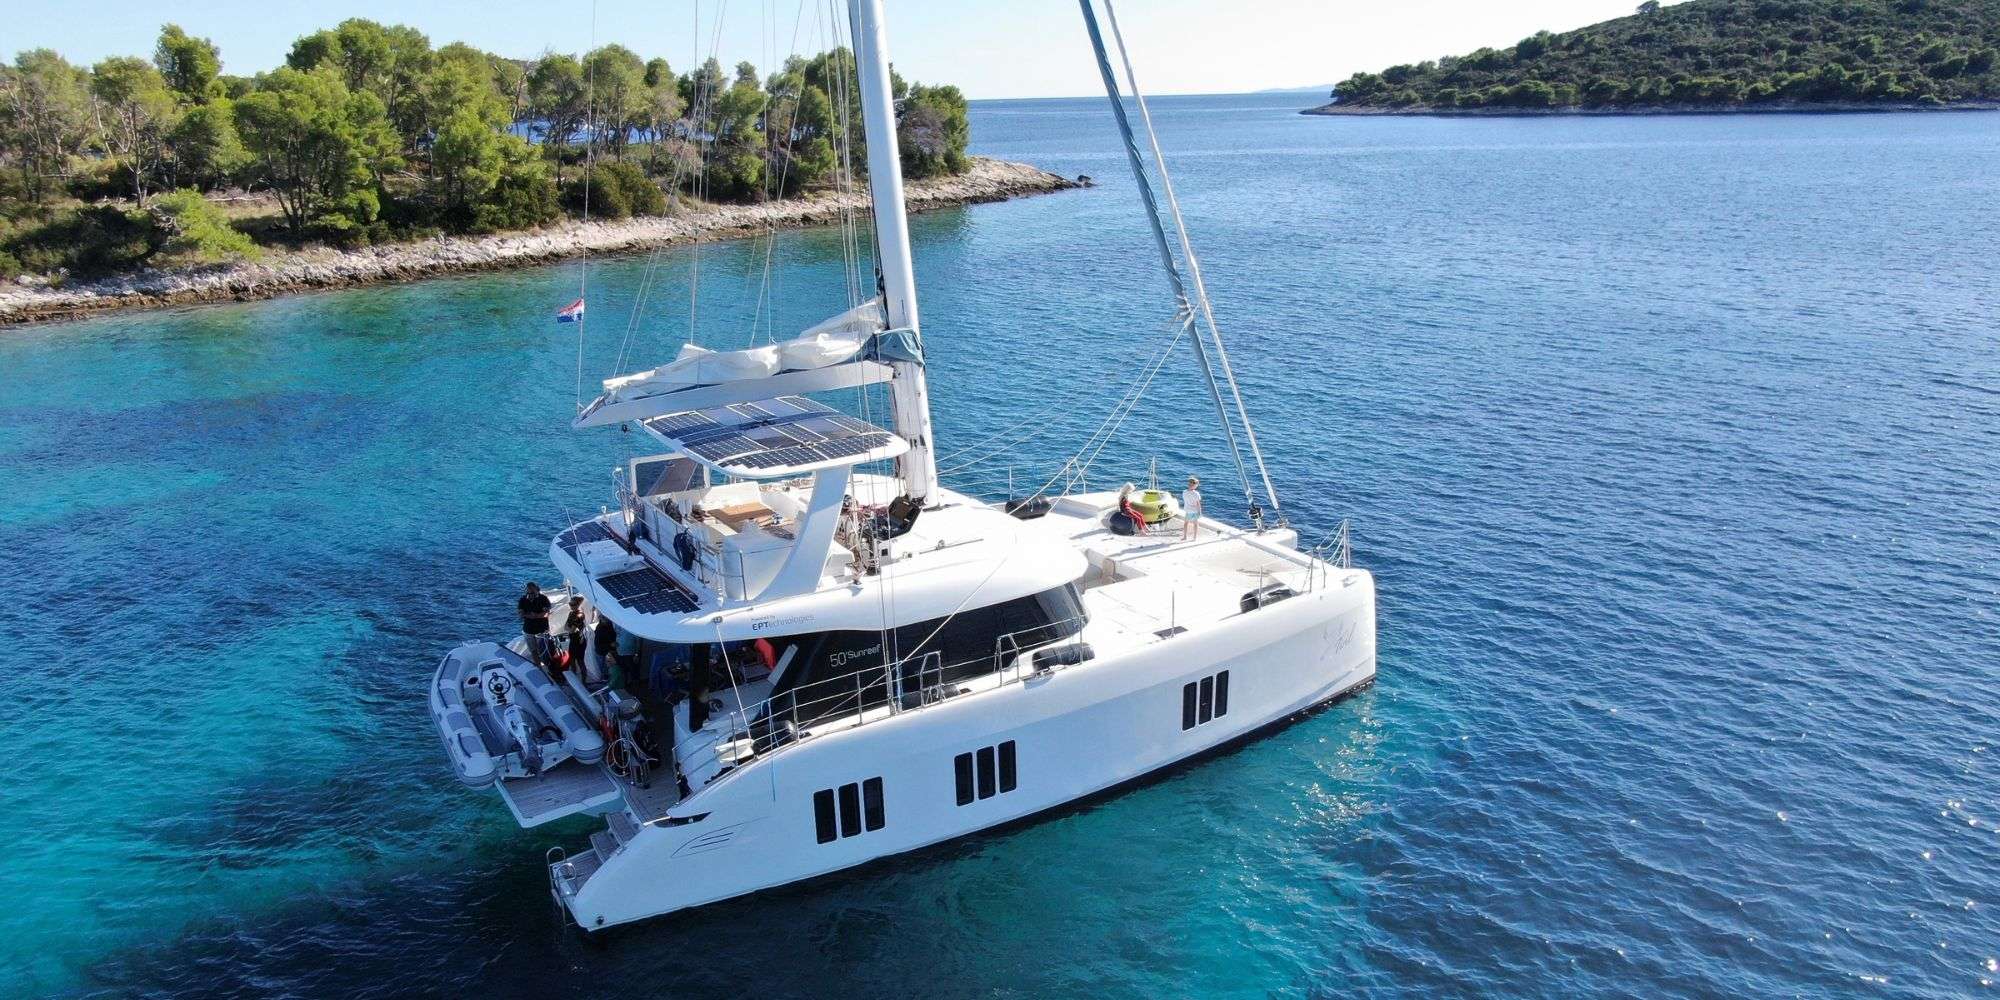 TIRIL - Yacht Charter Tahiti & Boat hire in French Polynesia 2